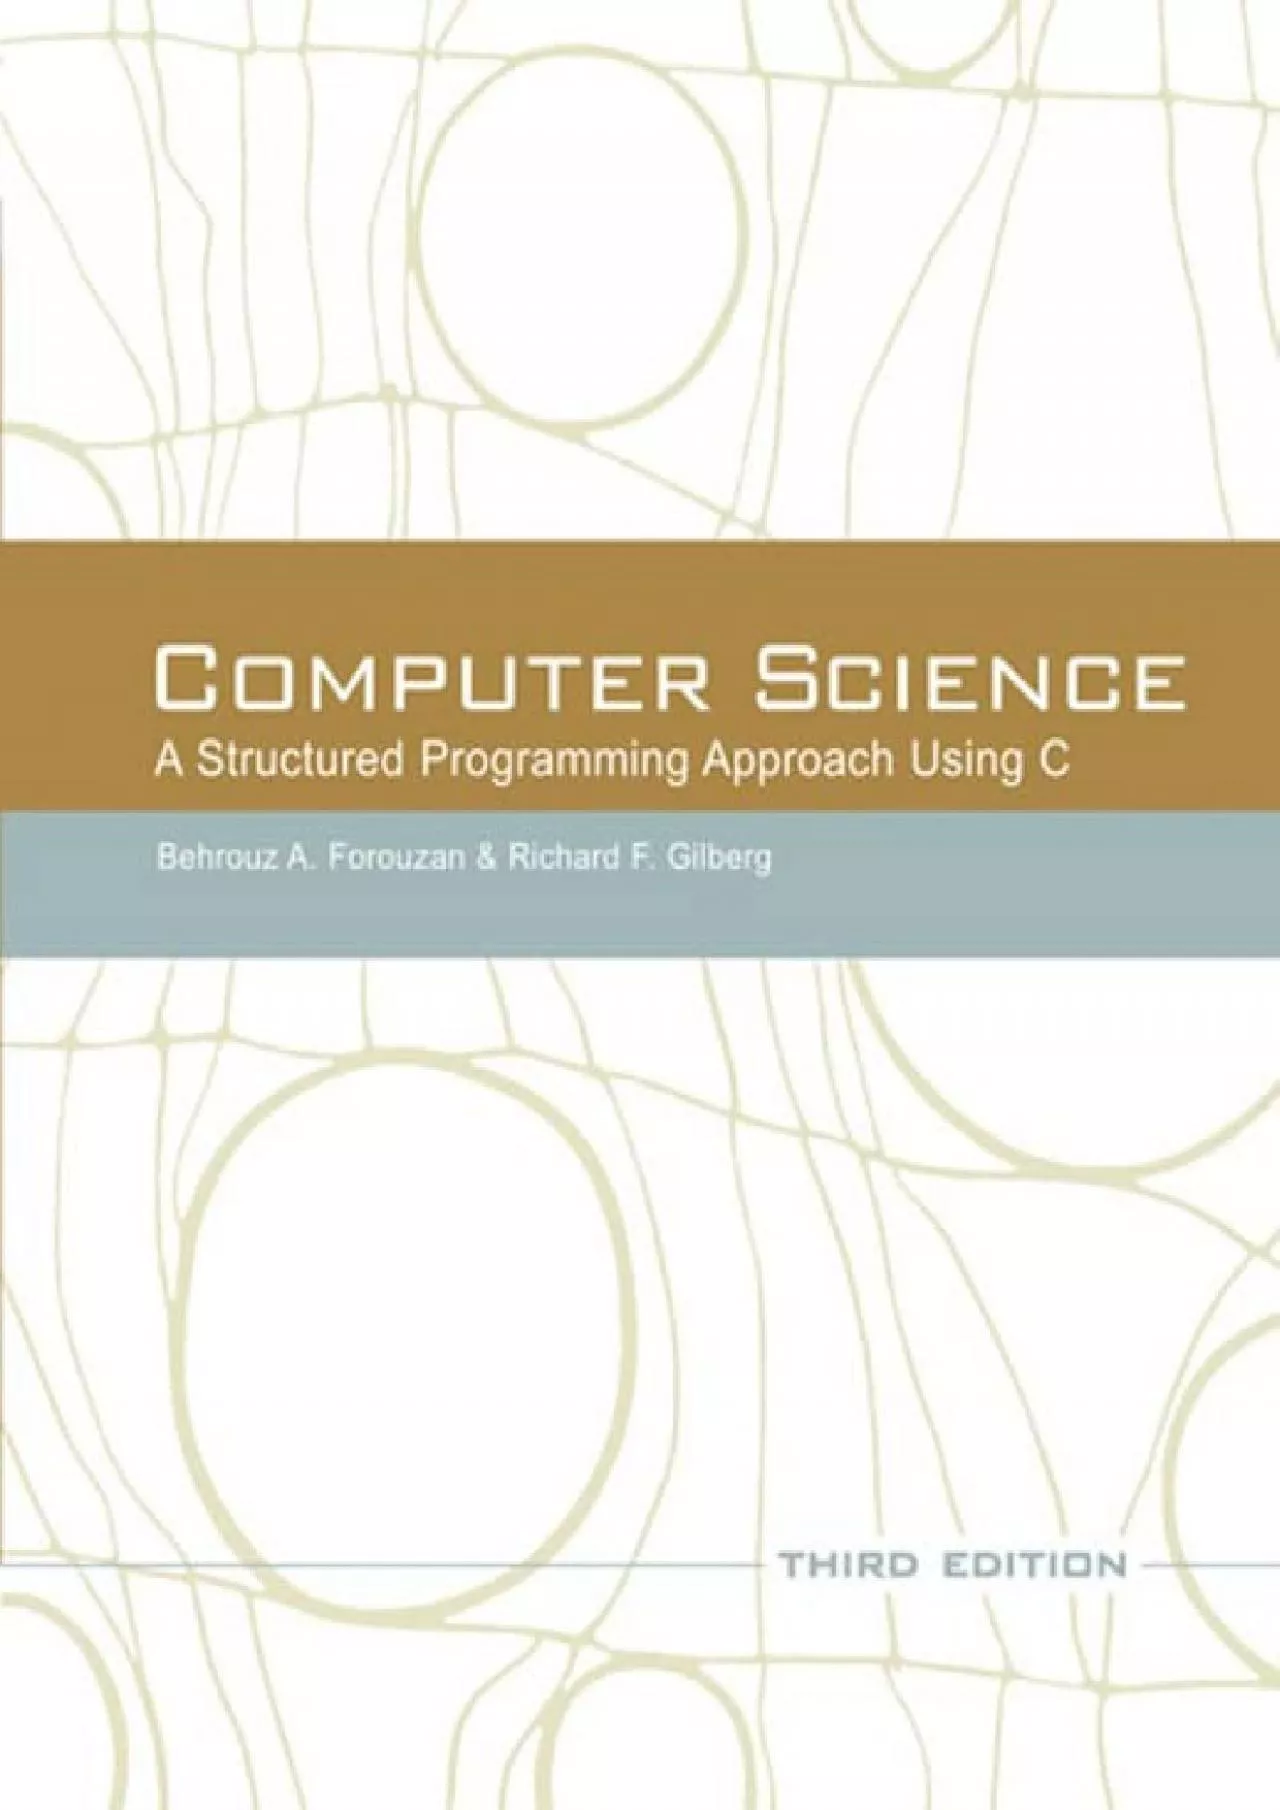 [PDF]-Computer Science: A Structured Programming Approach Using C (3rd Edition)